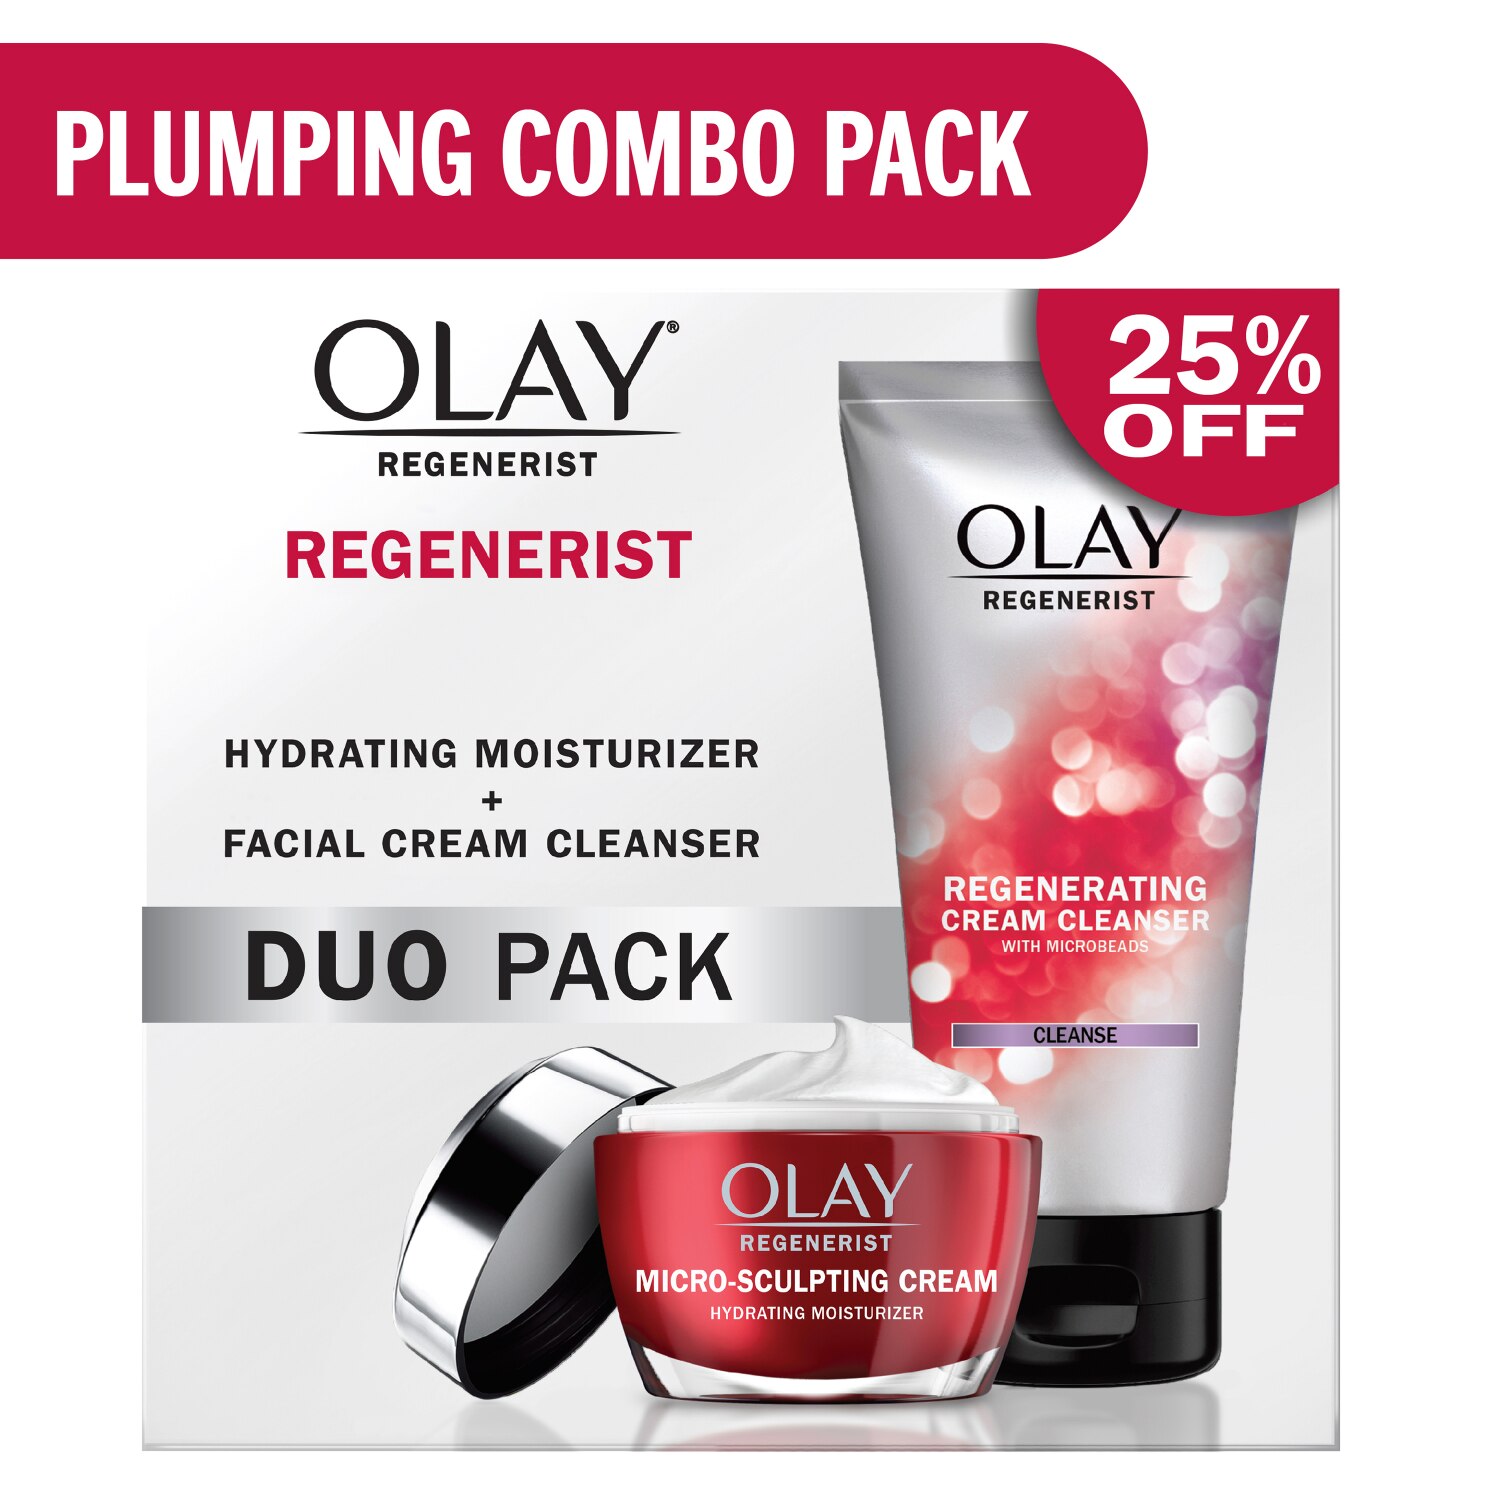 Olay Regenerist Advanced Anti-Aging Face Moisturizer and Pore Scrub Facial Cleanser, Value Pack Duo